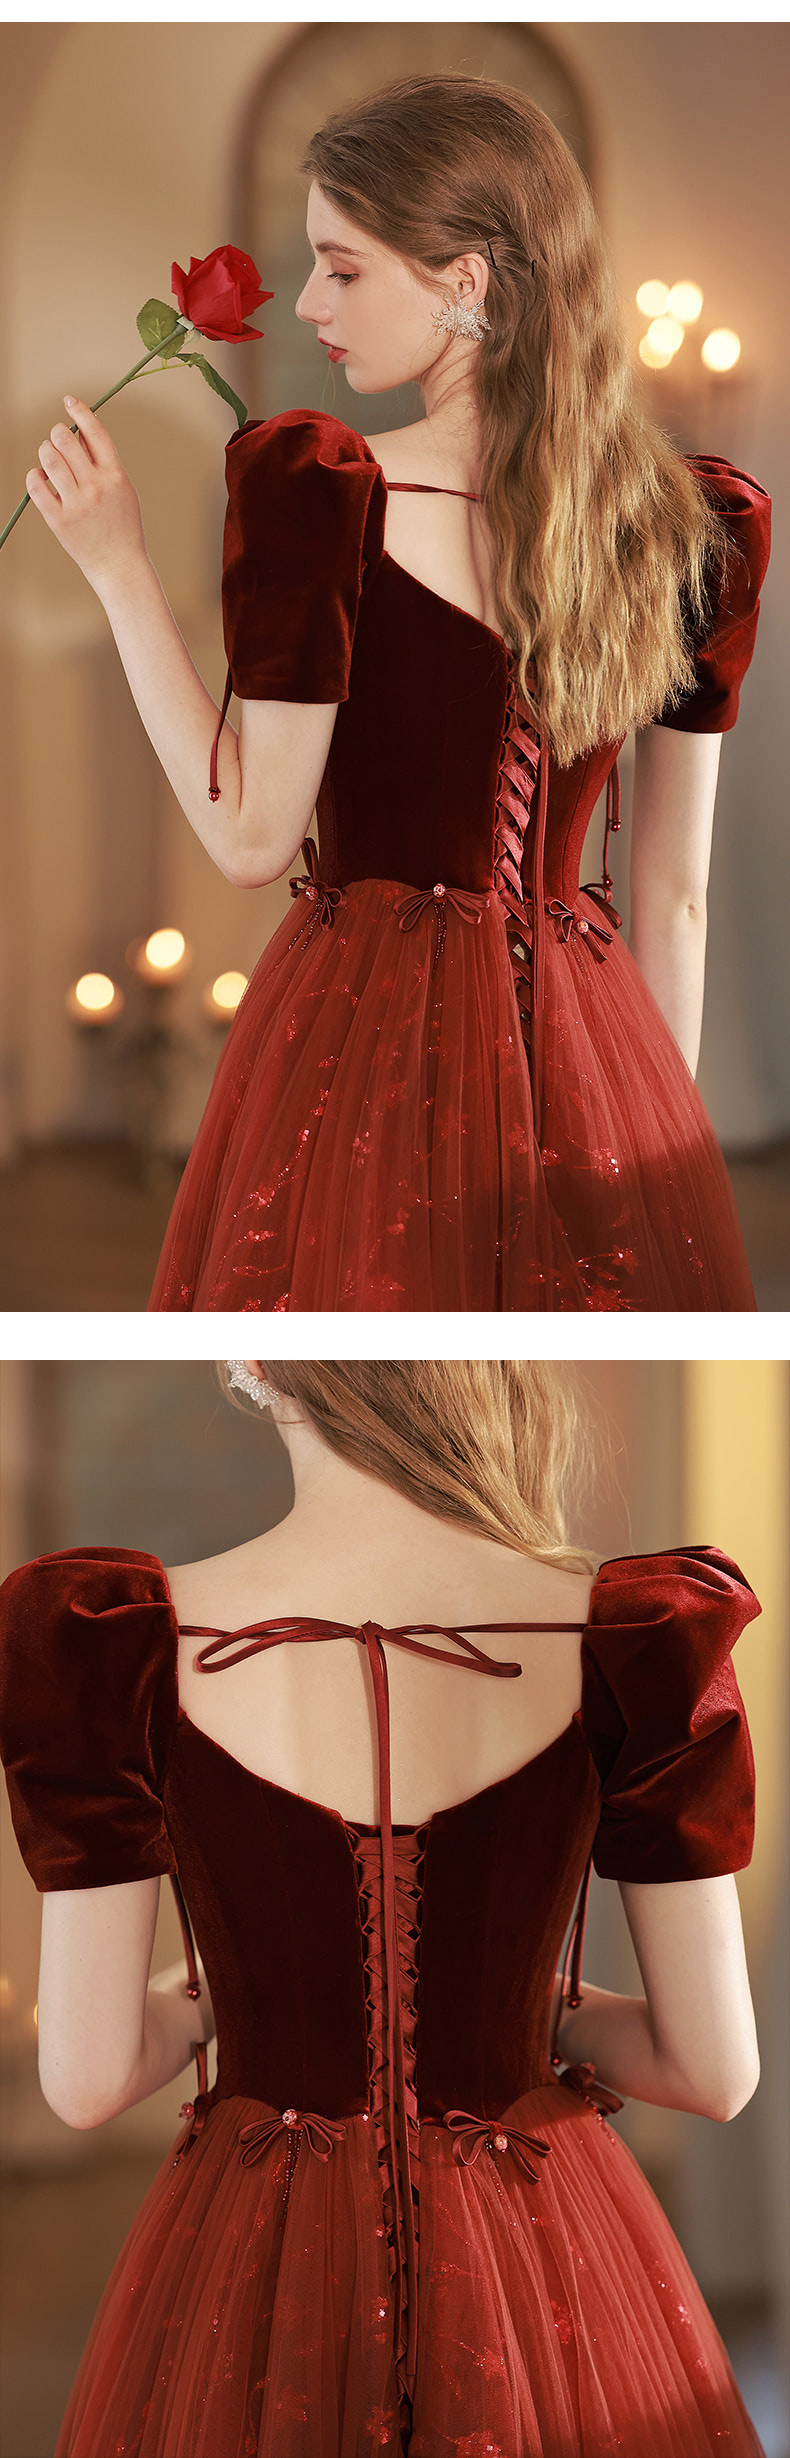 Vintage-Velvet-Embroidery-Evening-Party-Banquet-Long-Prom-Dress14.jpg